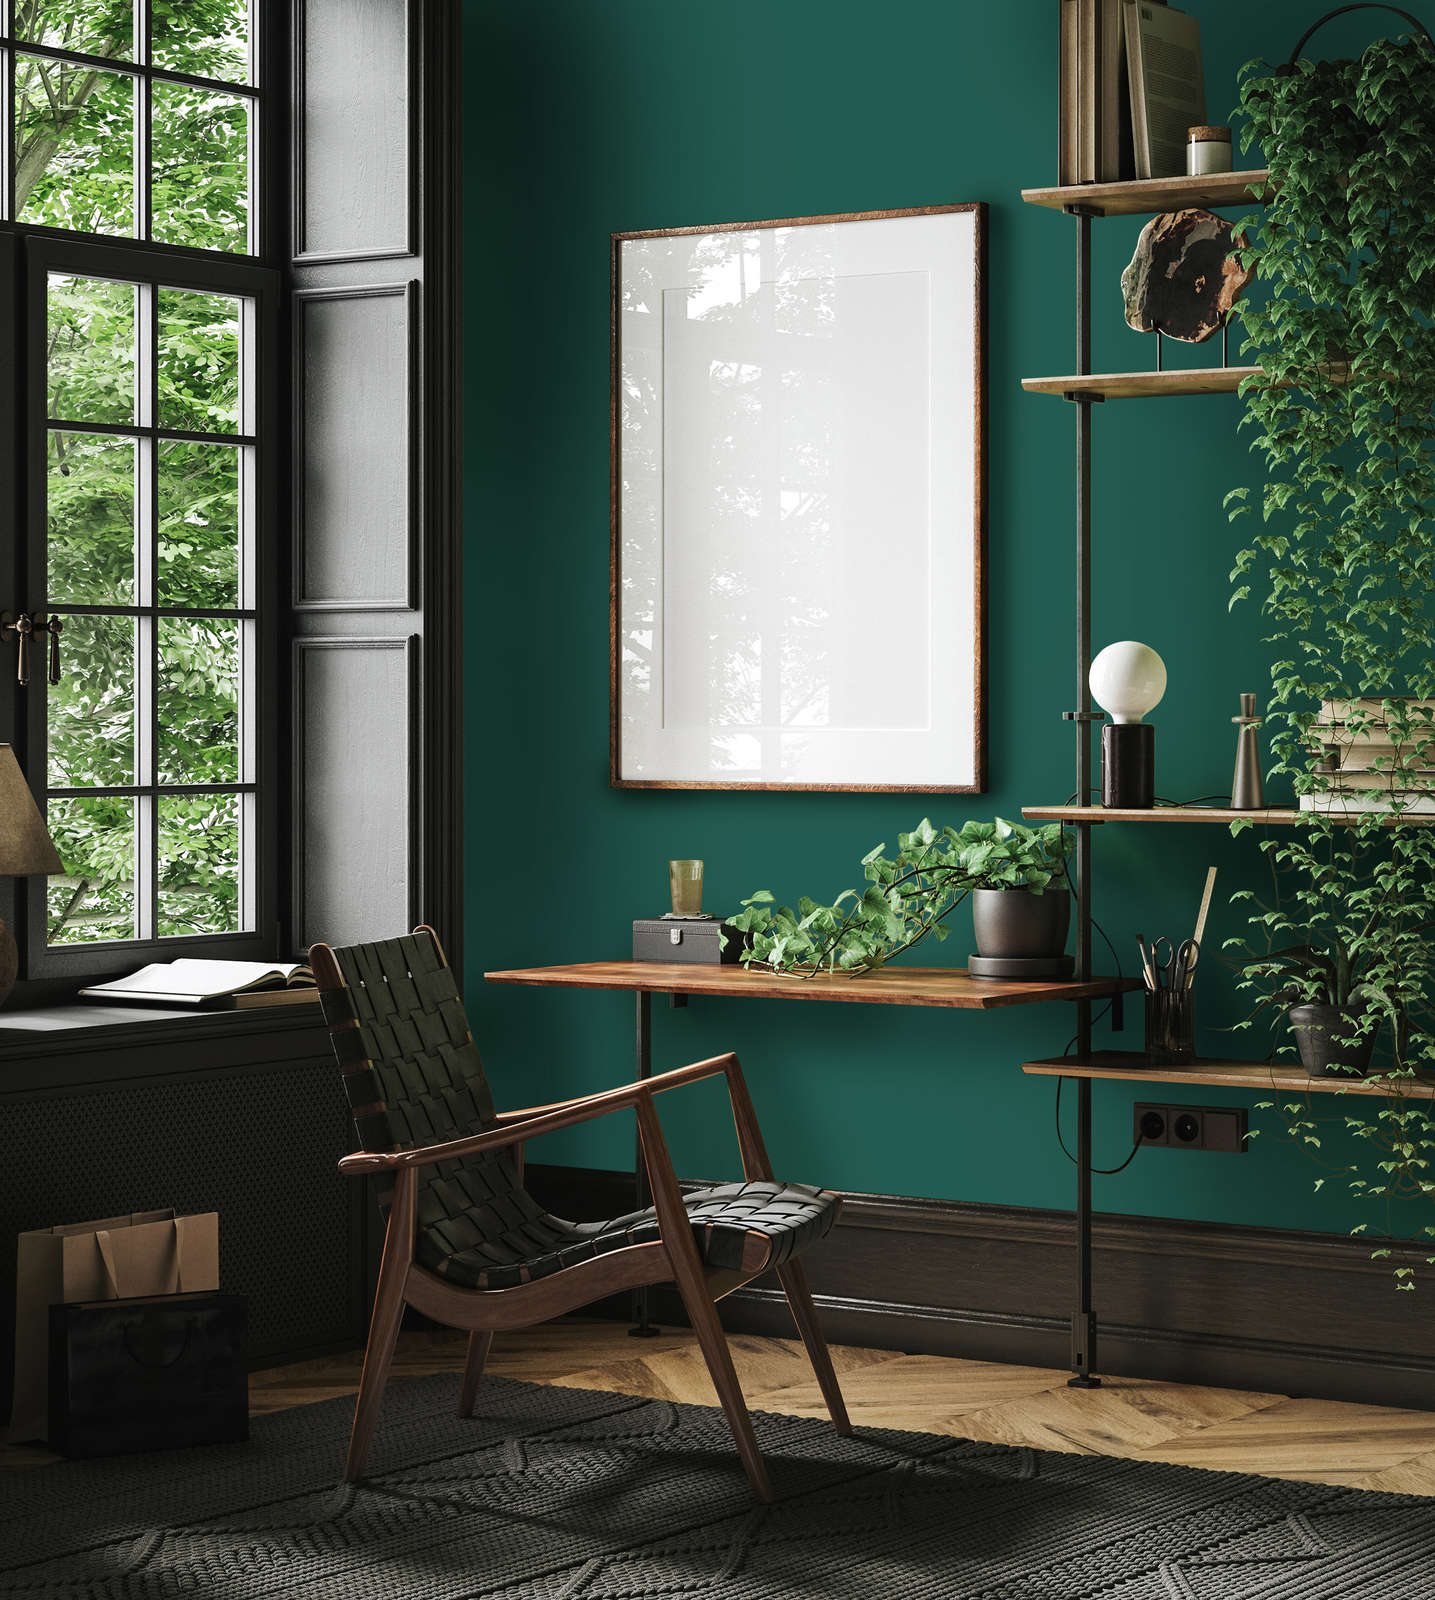             Premium Wall Paint gorgeous emerald green »Expressive Emerald« NW412 – 2,5 litre
        